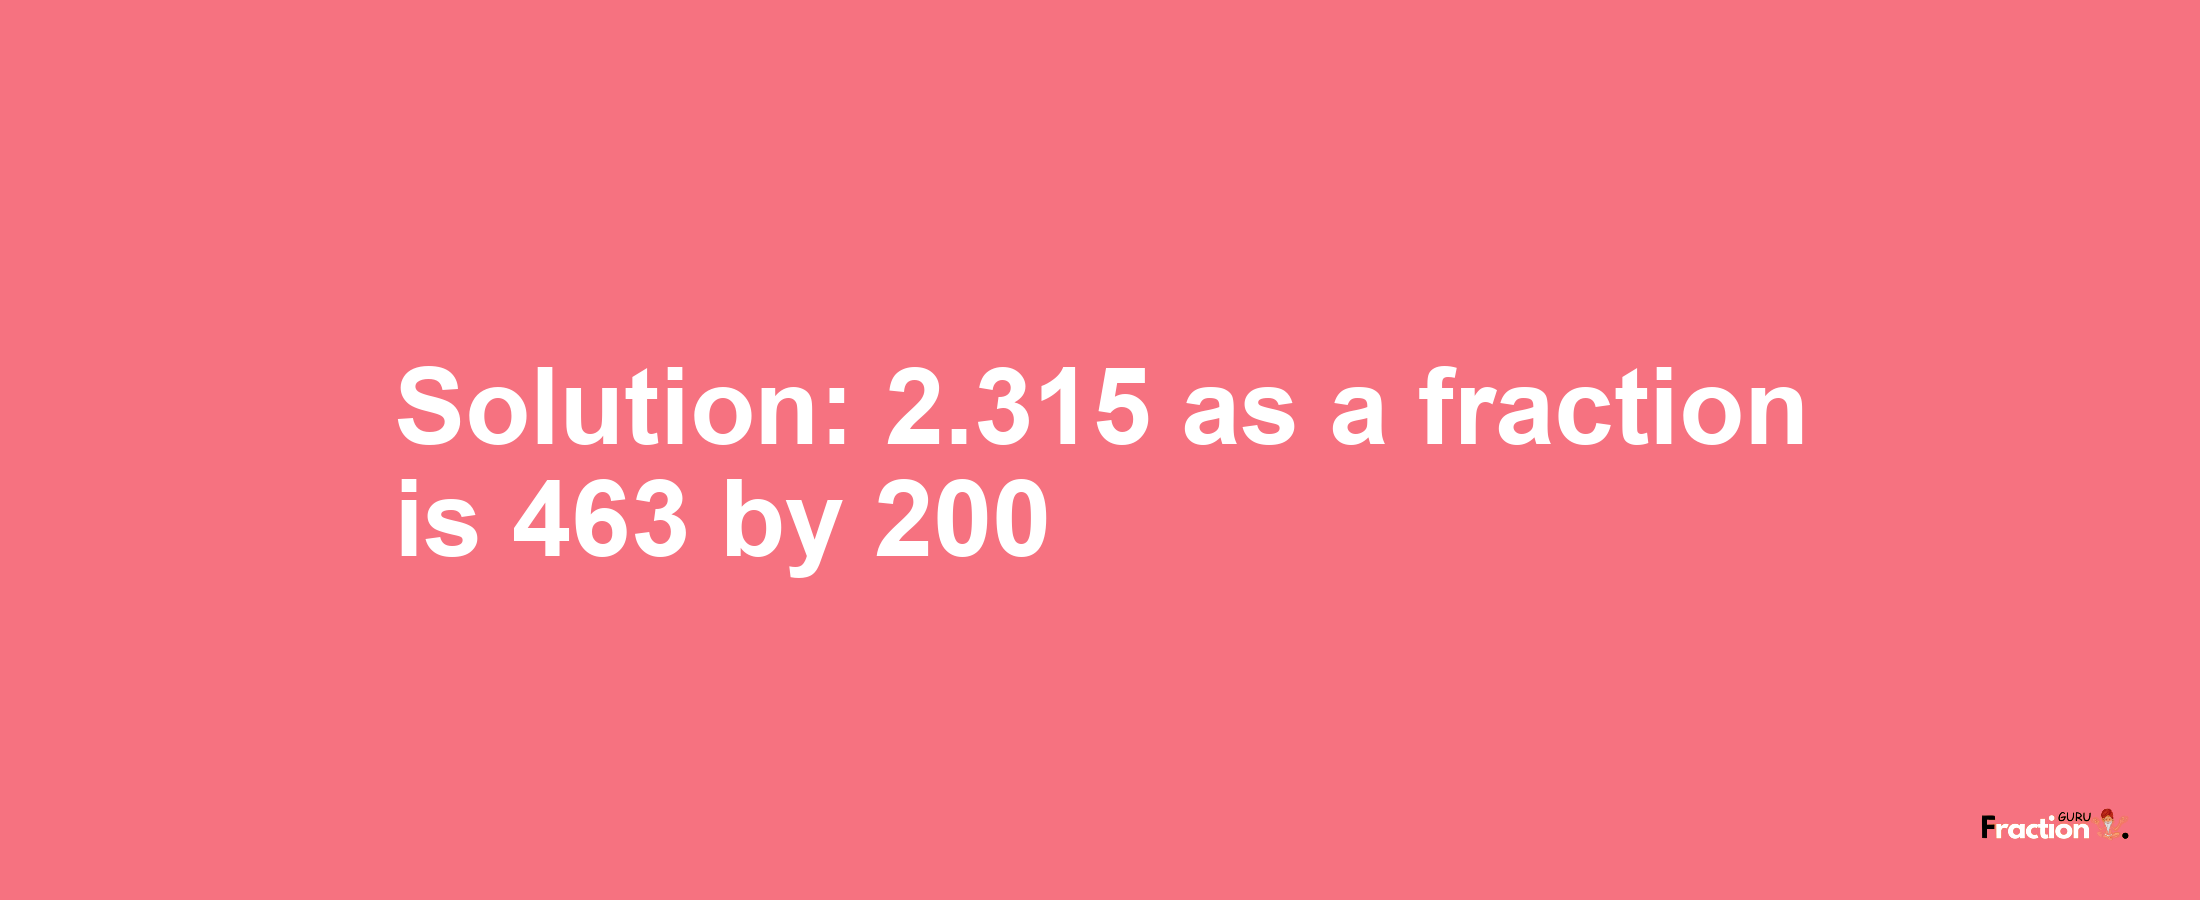 Solution:2.315 as a fraction is 463/200